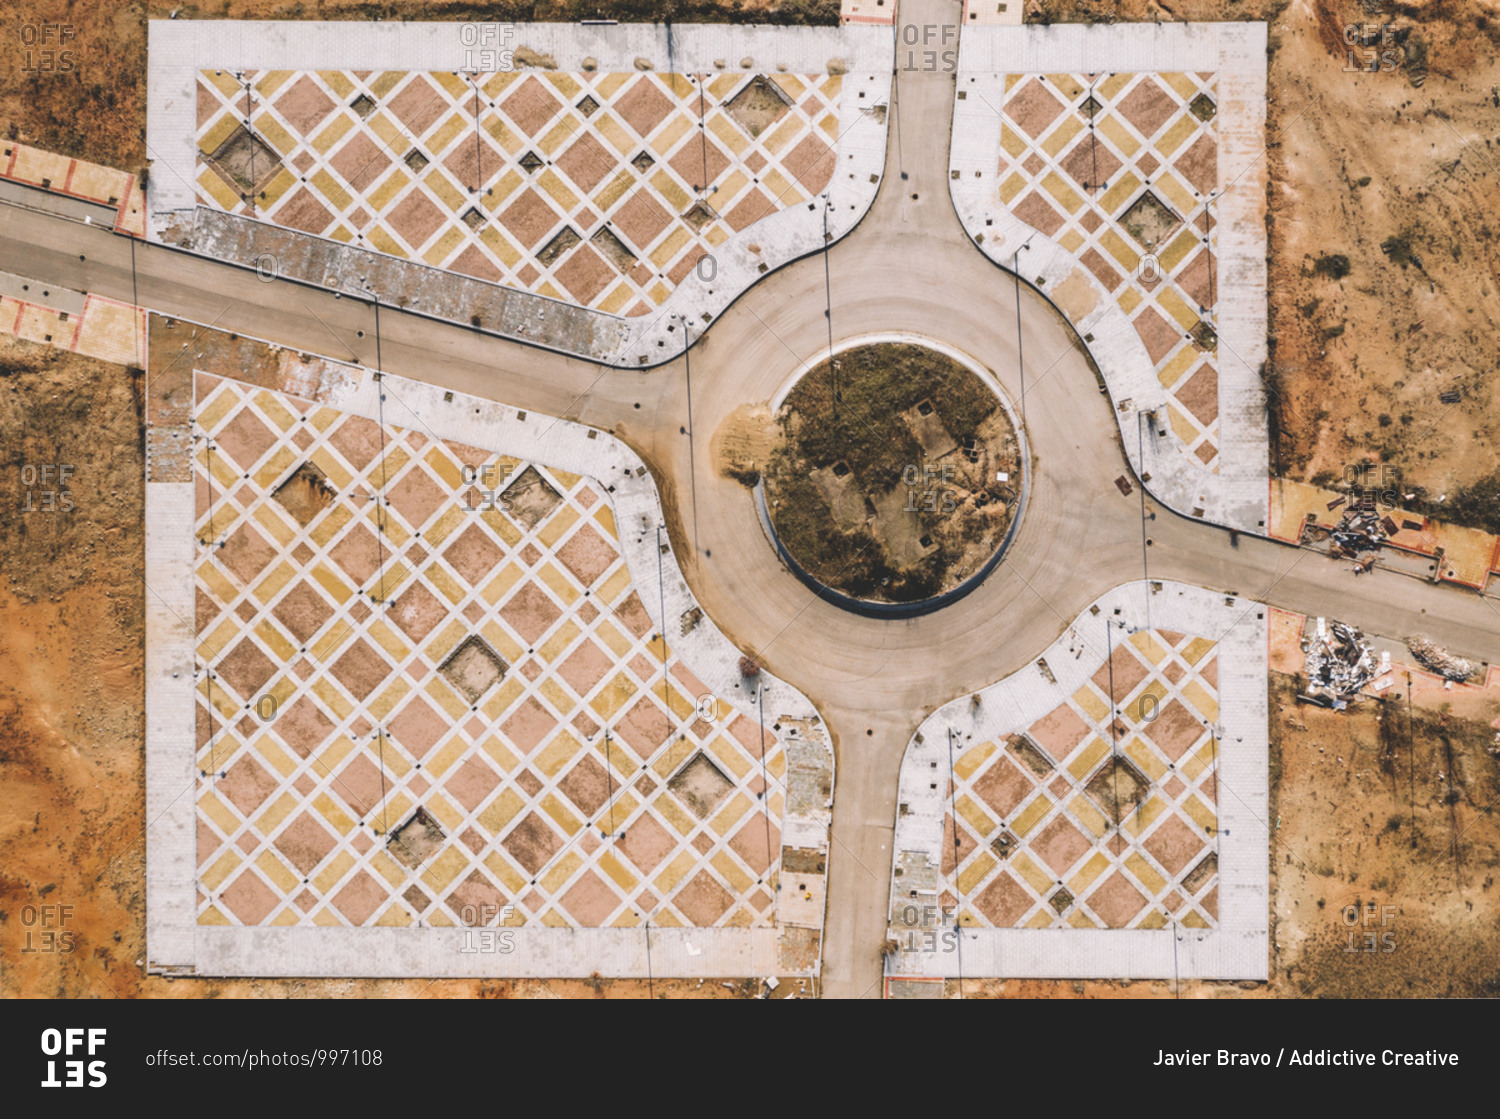 From above aerial view of road intersection with traffic roundabout in dry terrain with ornamental infrastructure